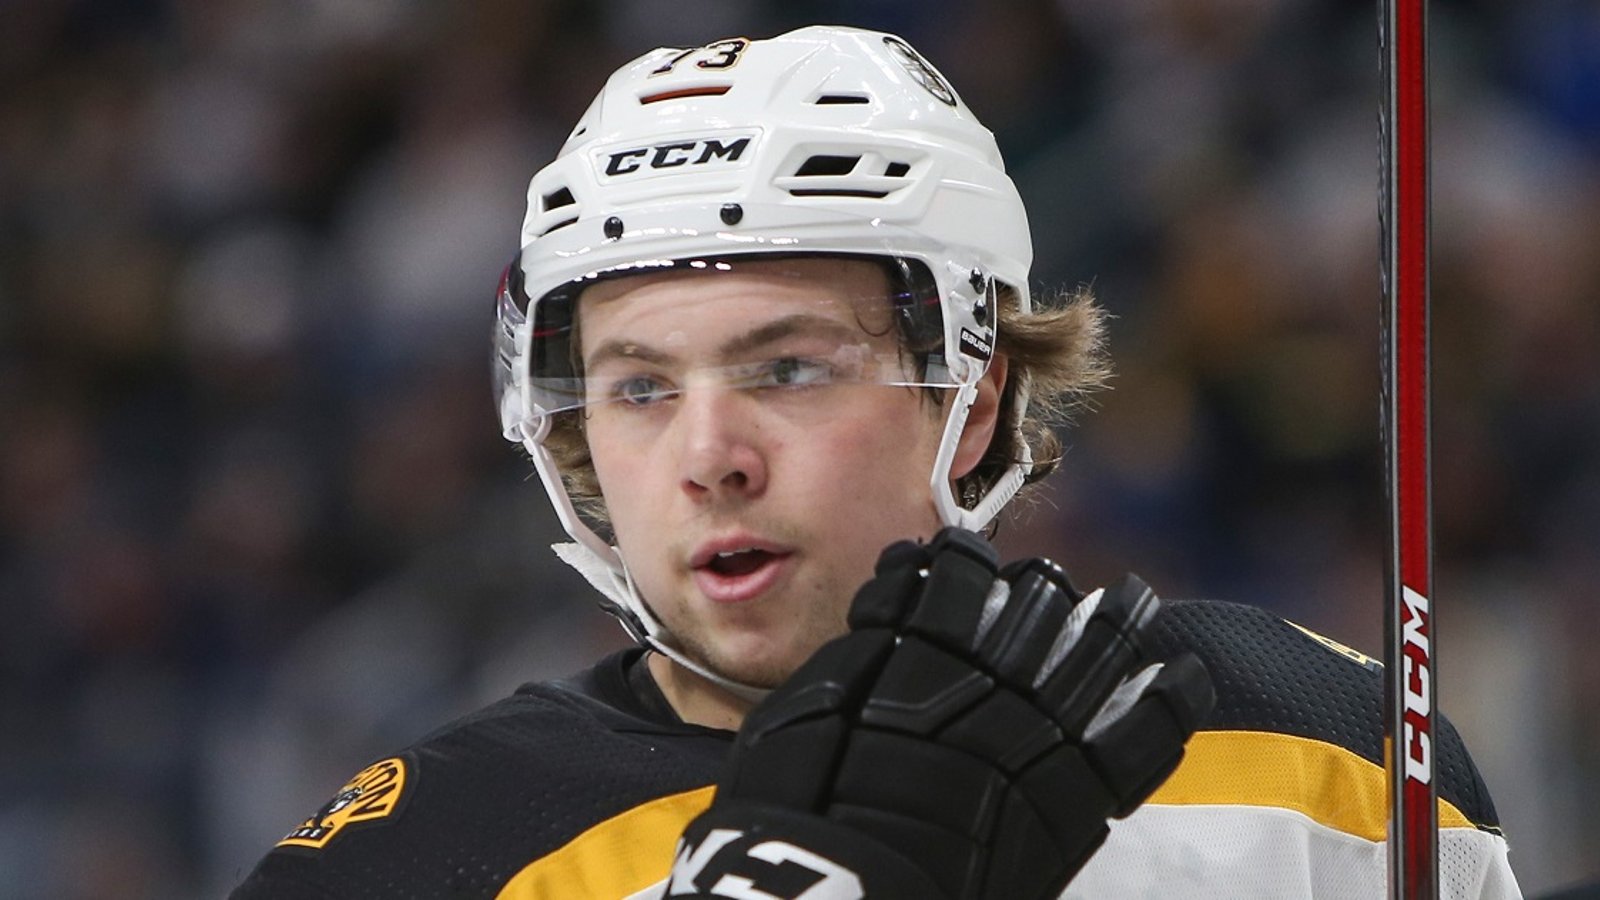 Breaking: McAvoy pulled from the Bruins' line up. 